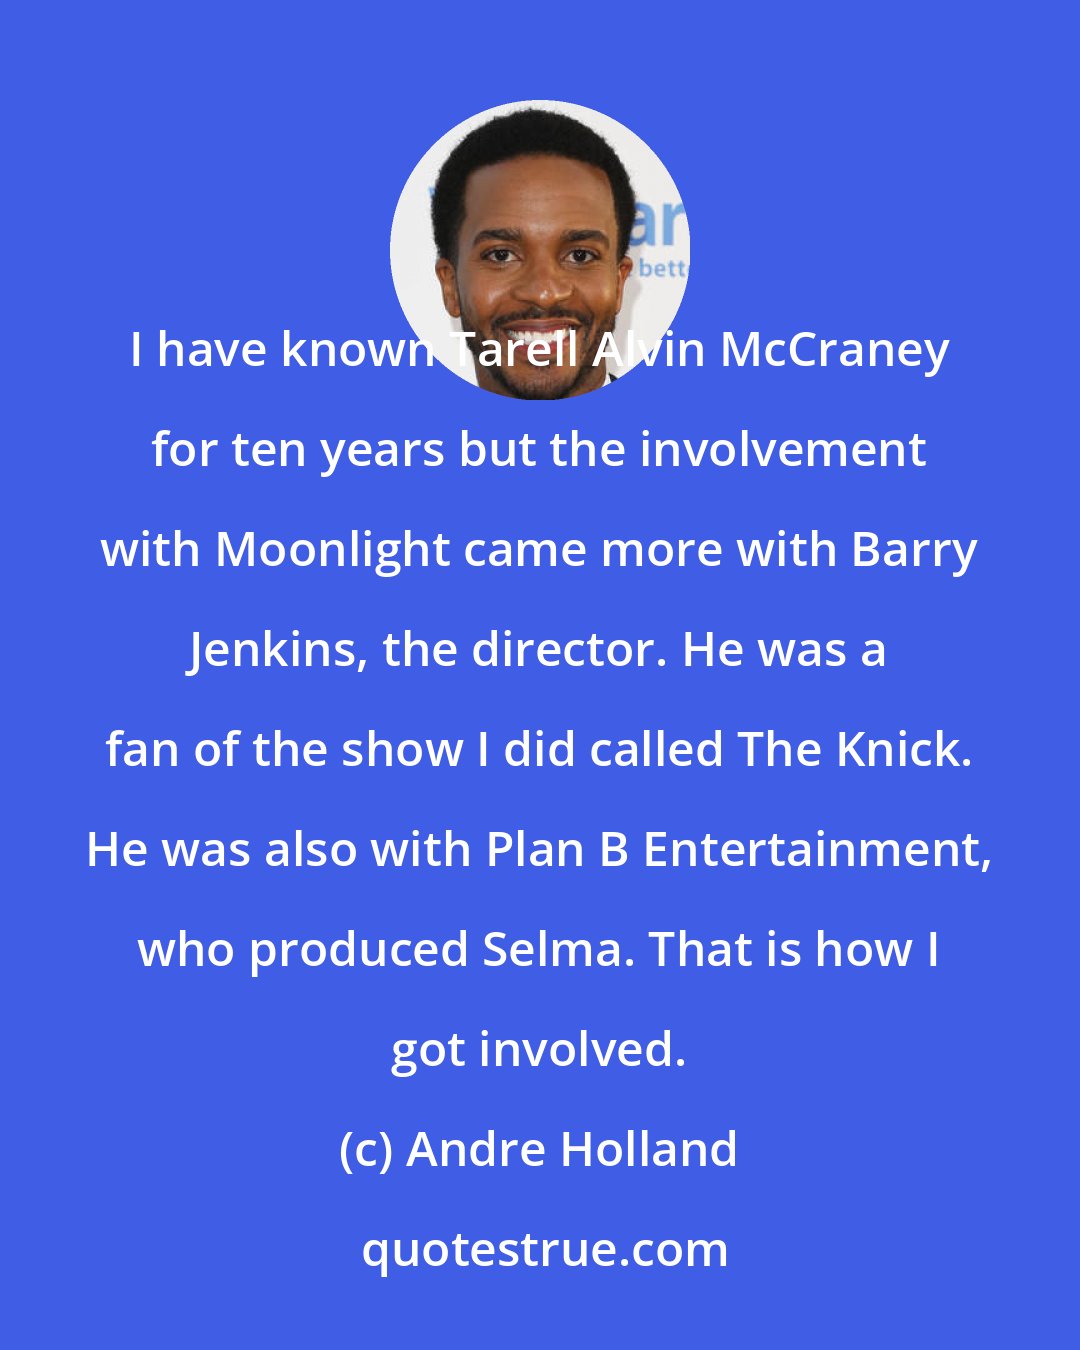 Andre Holland: I have known Tarell Alvin McCraney for ten years but the involvement with Moonlight came more with Barry Jenkins, the director. He was a fan of the show I did called The Knick. He was also with Plan B Entertainment, who produced Selma. That is how I got involved.